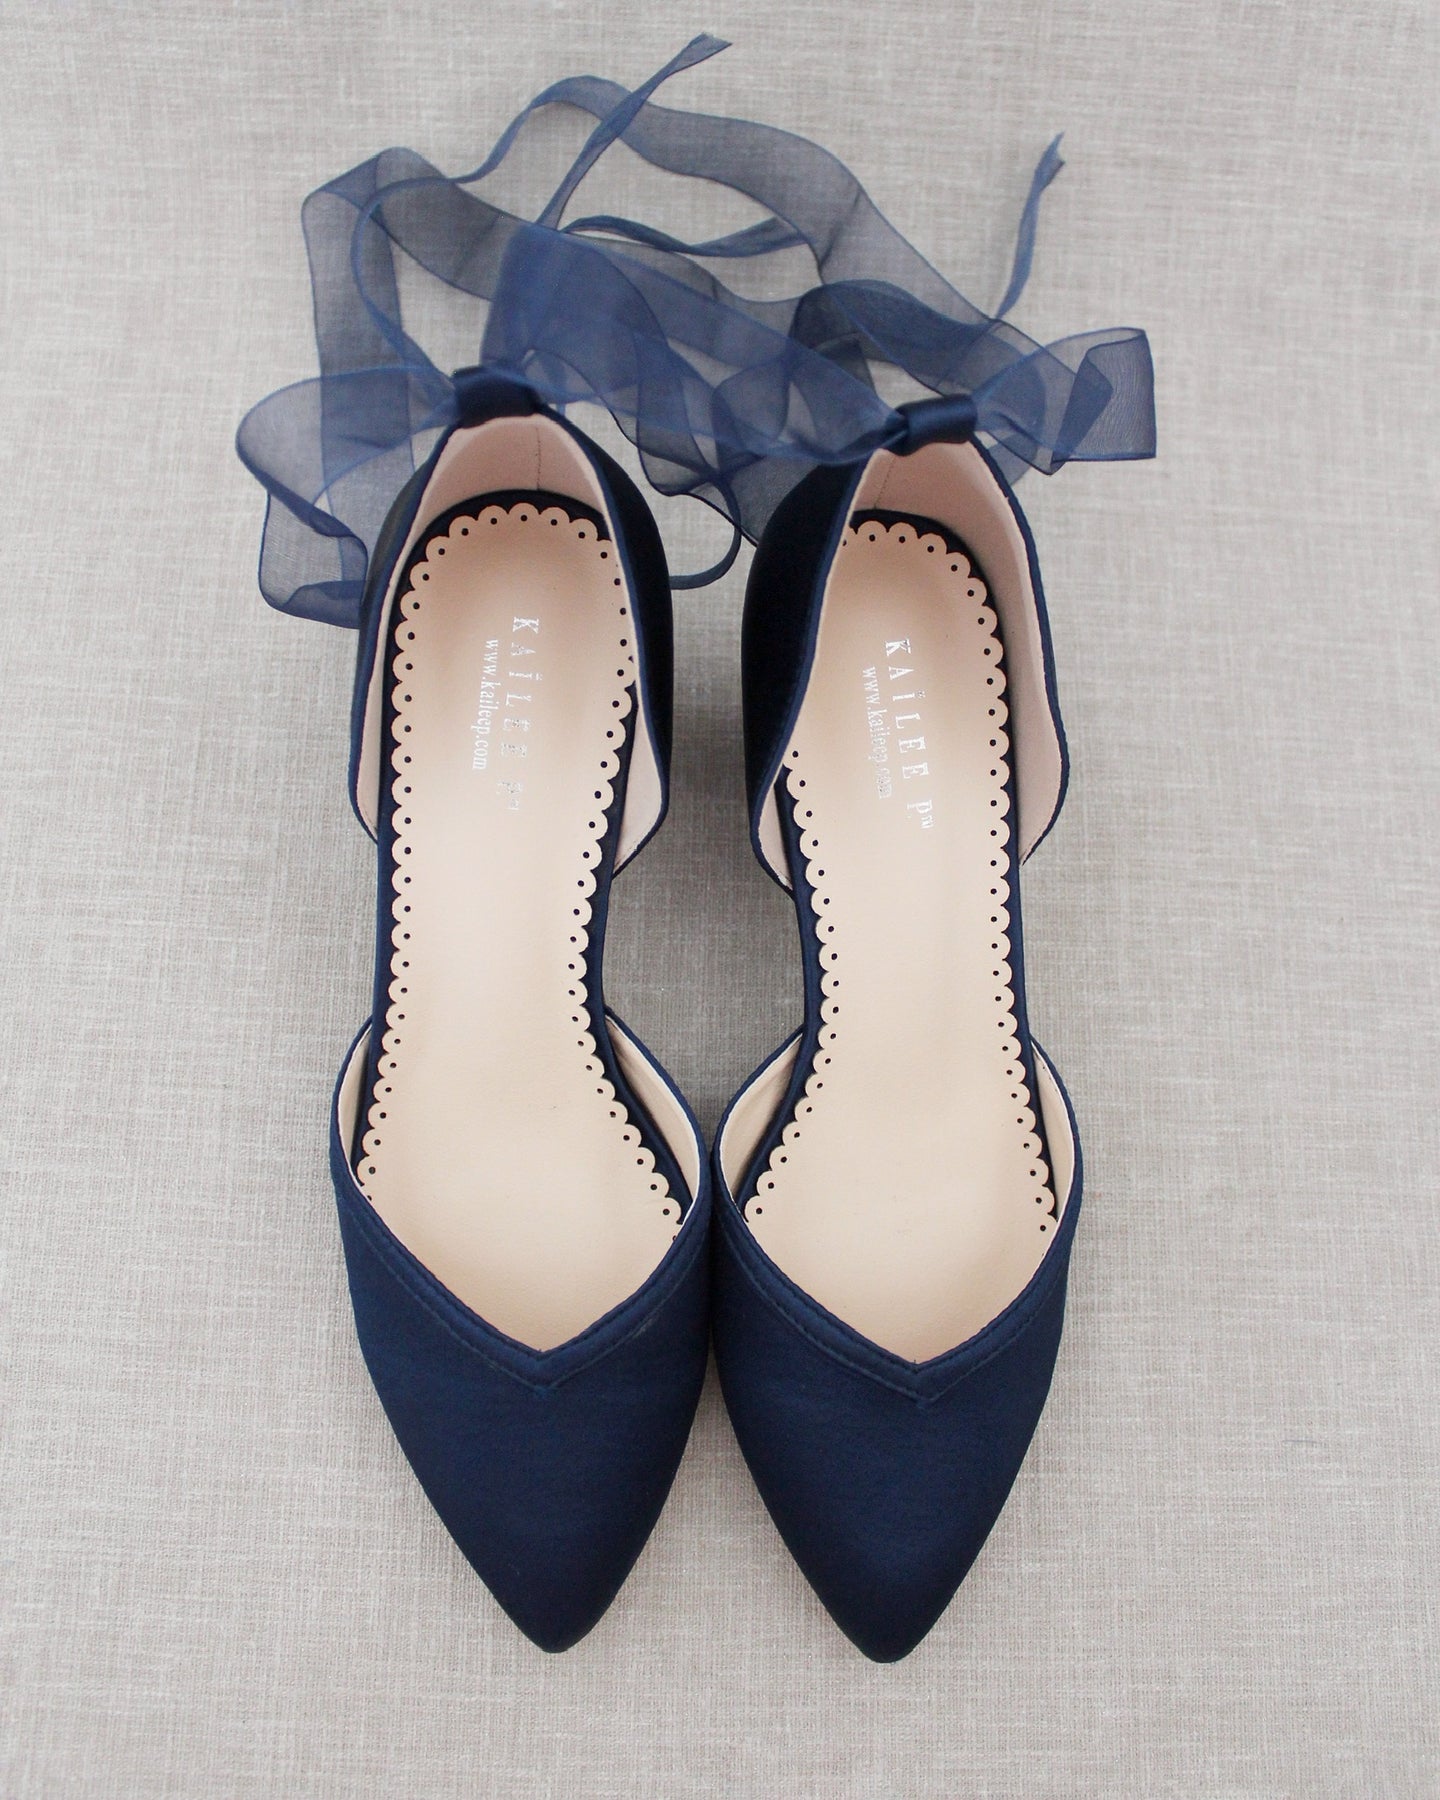 Satin Lace Up Evening Block Heels, Bridesmaids Shoes, Prom Shoes ...